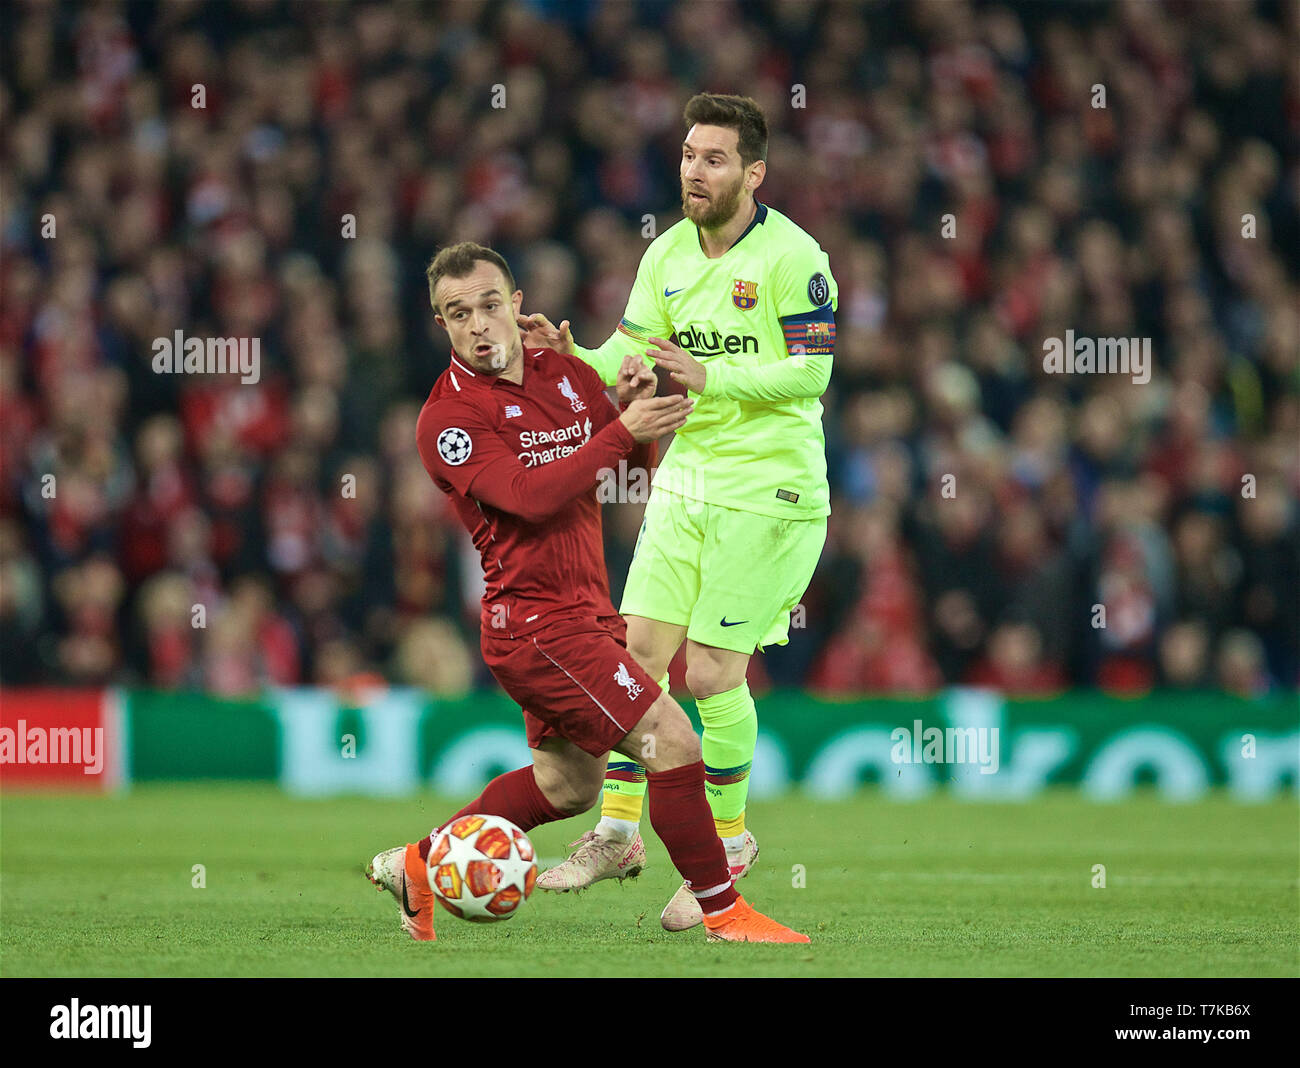 Liverpool. 8th May, 2019. Liverpool's Xherdan Shaqiri (L) vies with FC Barcelona's Lionel Messi during the UEFA Champions League Semi-Final second Leg match between Liverpool FC and FC Barcelona at Anfield in Liverpool, Britain on May 7, 2019. Liverpool won 4-3 on aggregate and reached the final. Credit: Xinhua/Alamy Live News Stock Photo